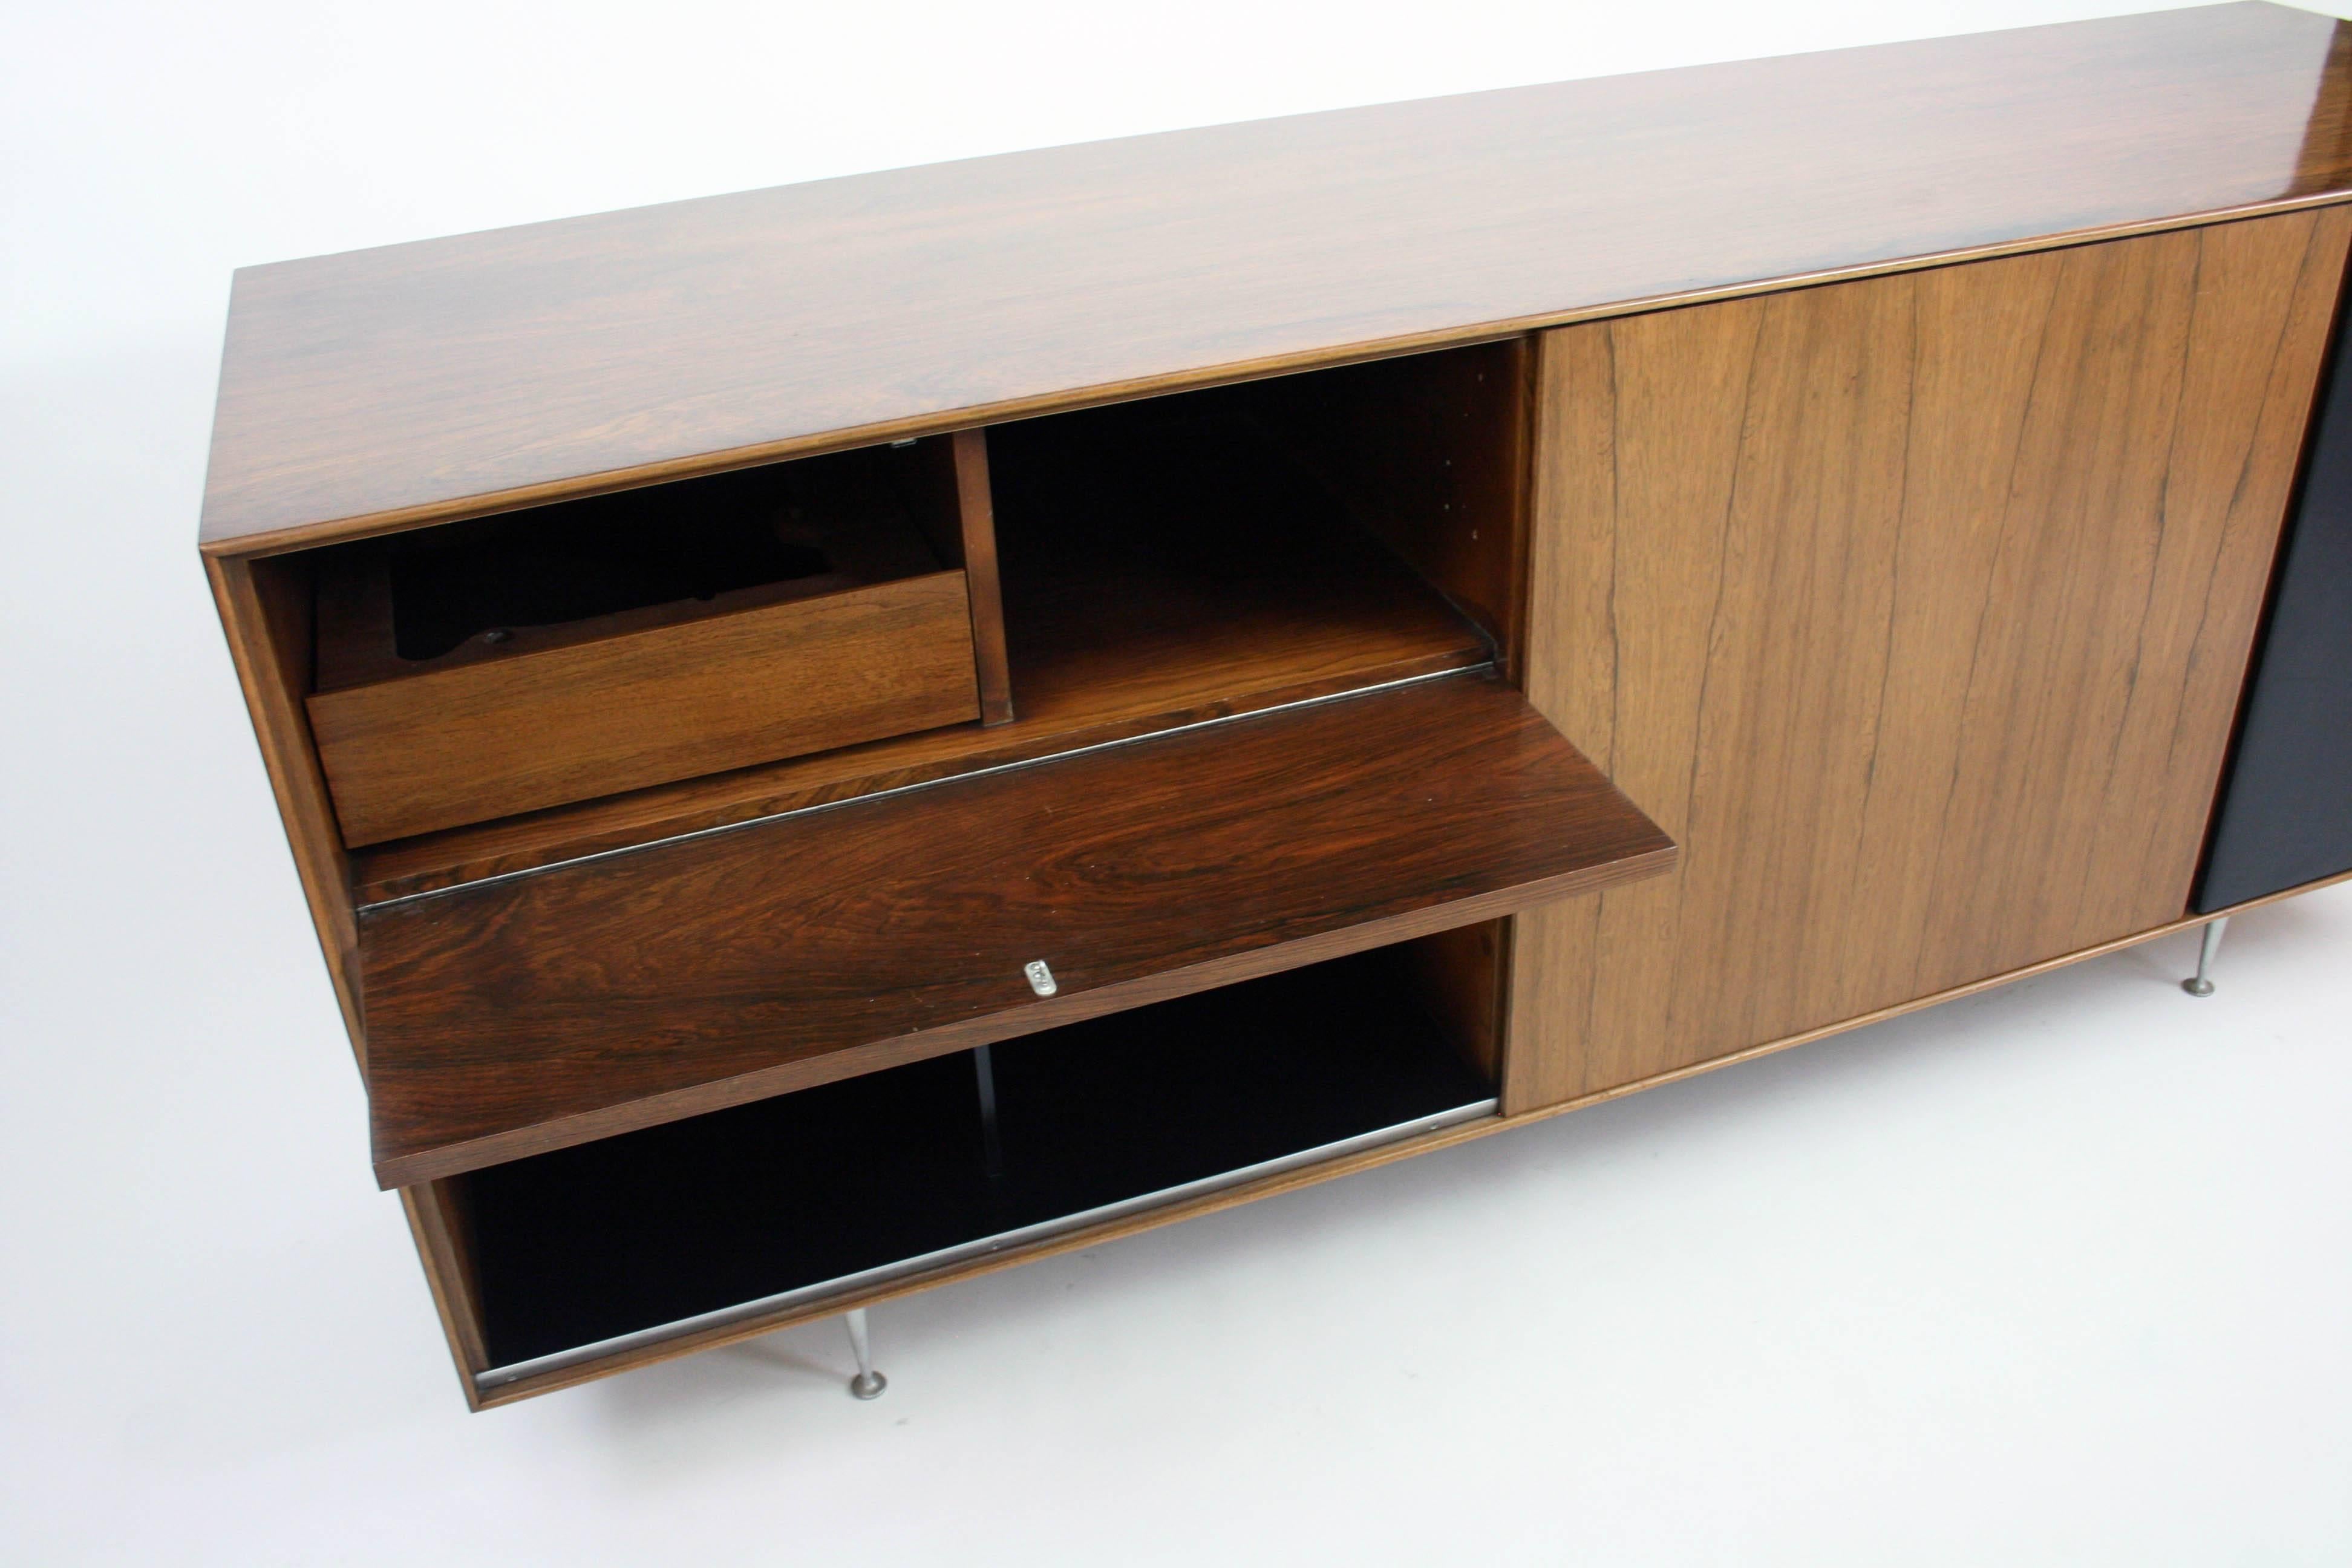 Lacquered George Nelson for Herman Miller 'Thin Edge' TV / HIFI Cabinet model 5718